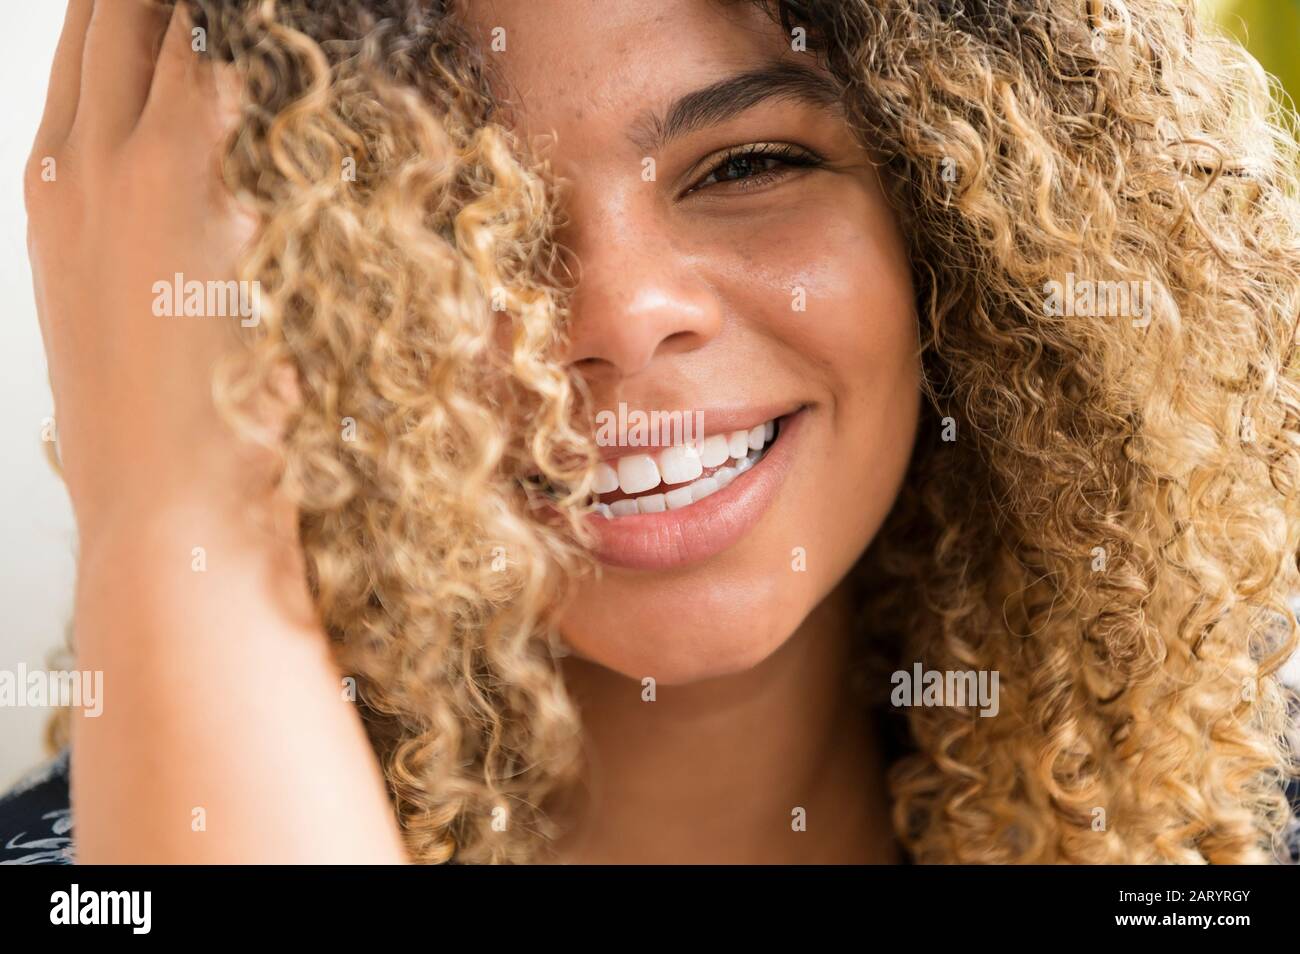 Smiling woman touching her hair Banque D'Images